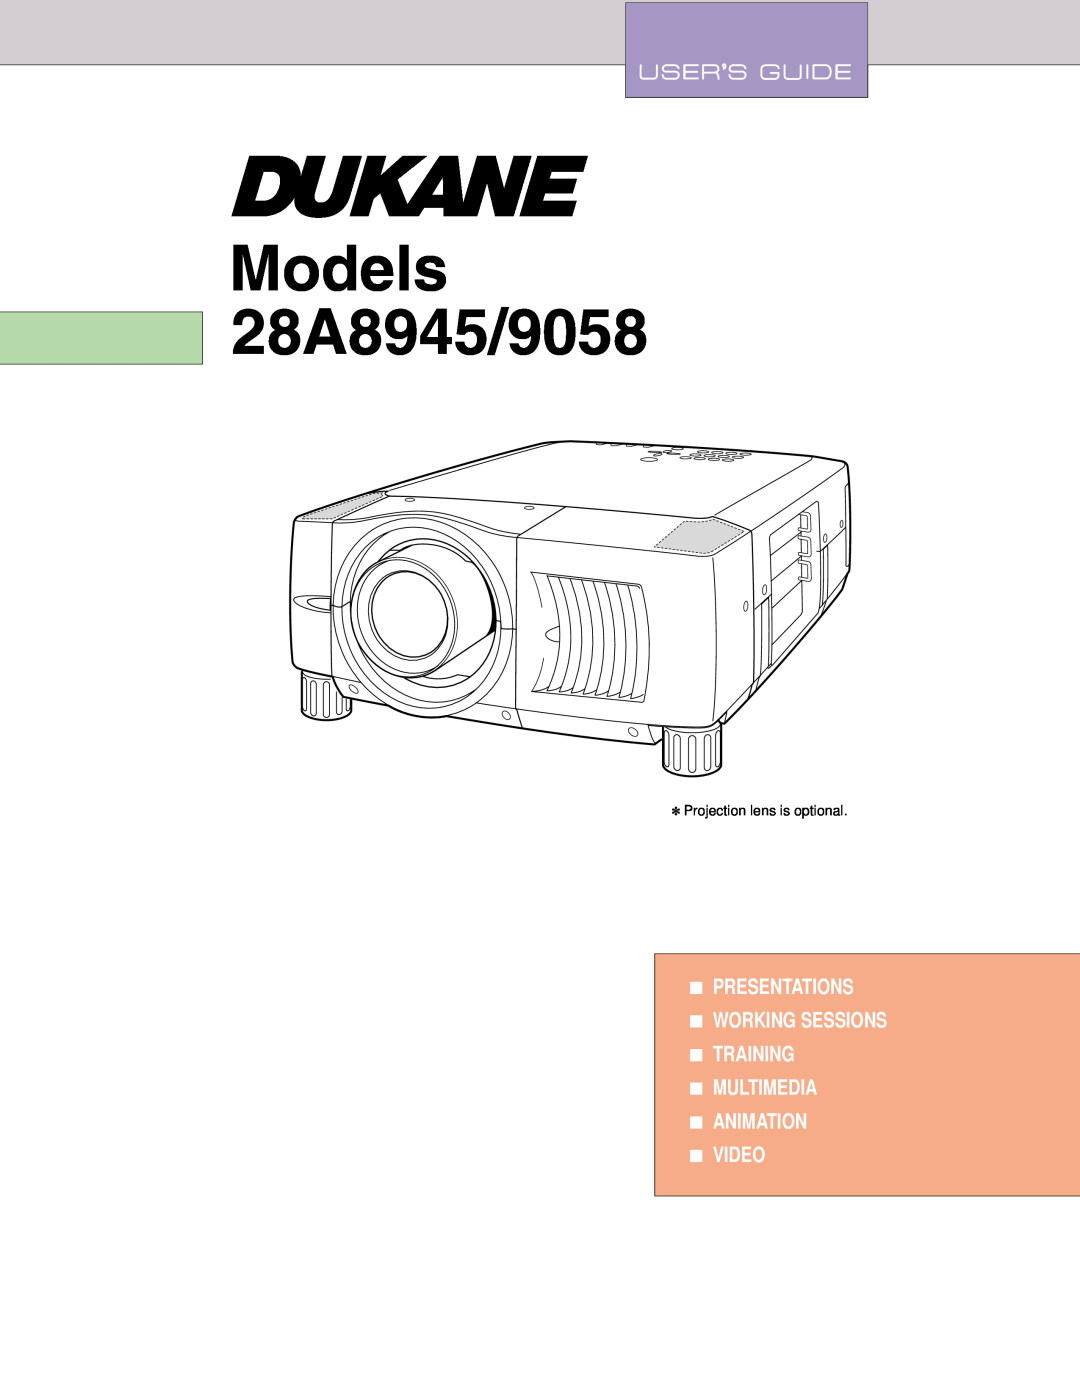 Dukane 28A9058 manual Presentations Working Sessions Training Multimedia Animation Video, Models 28A8945/9058 